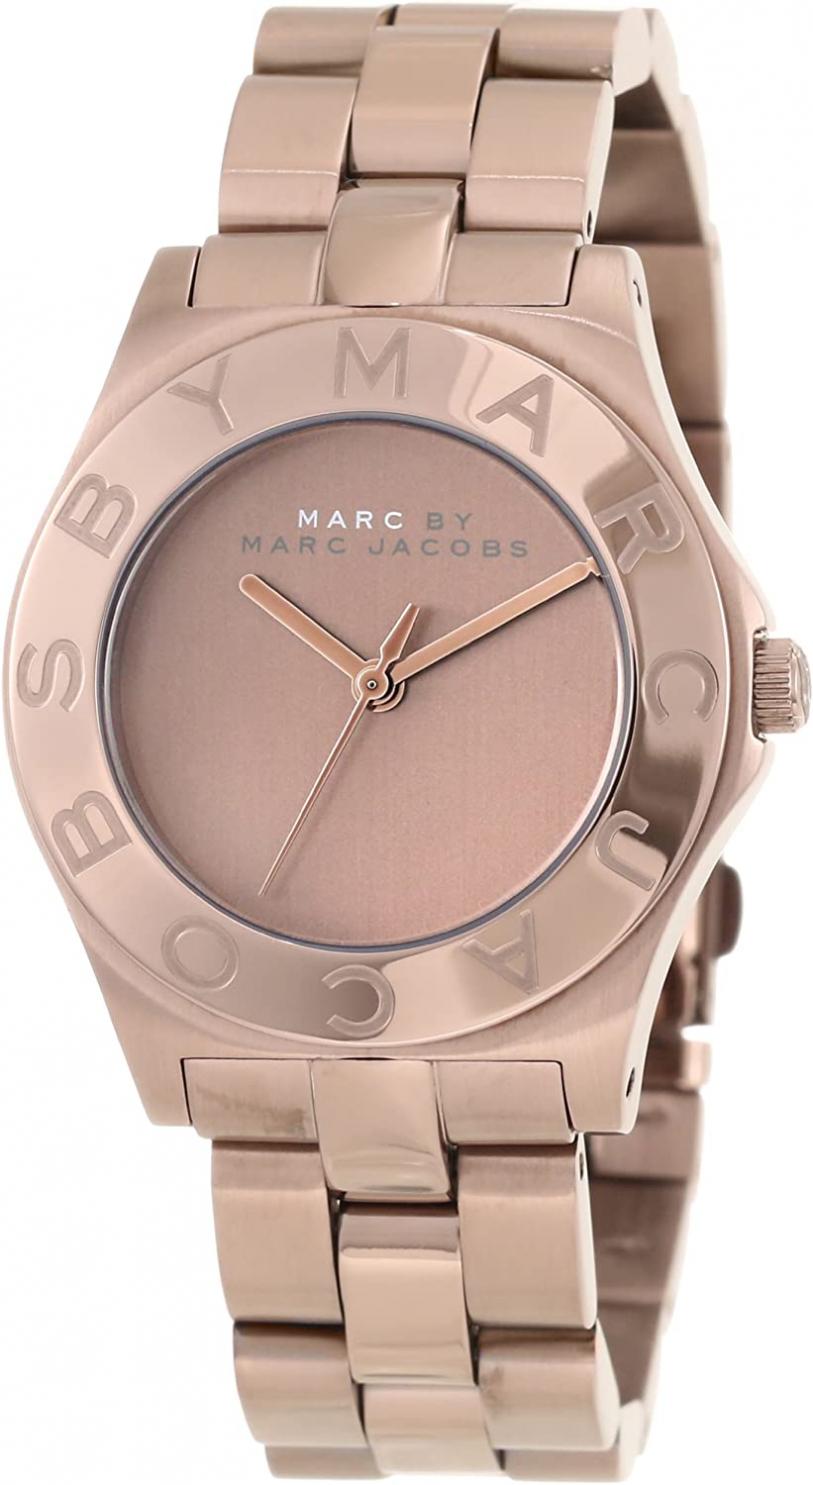 Marc by Marc Jacobs Women's MBM3128 Blade Brown Watch